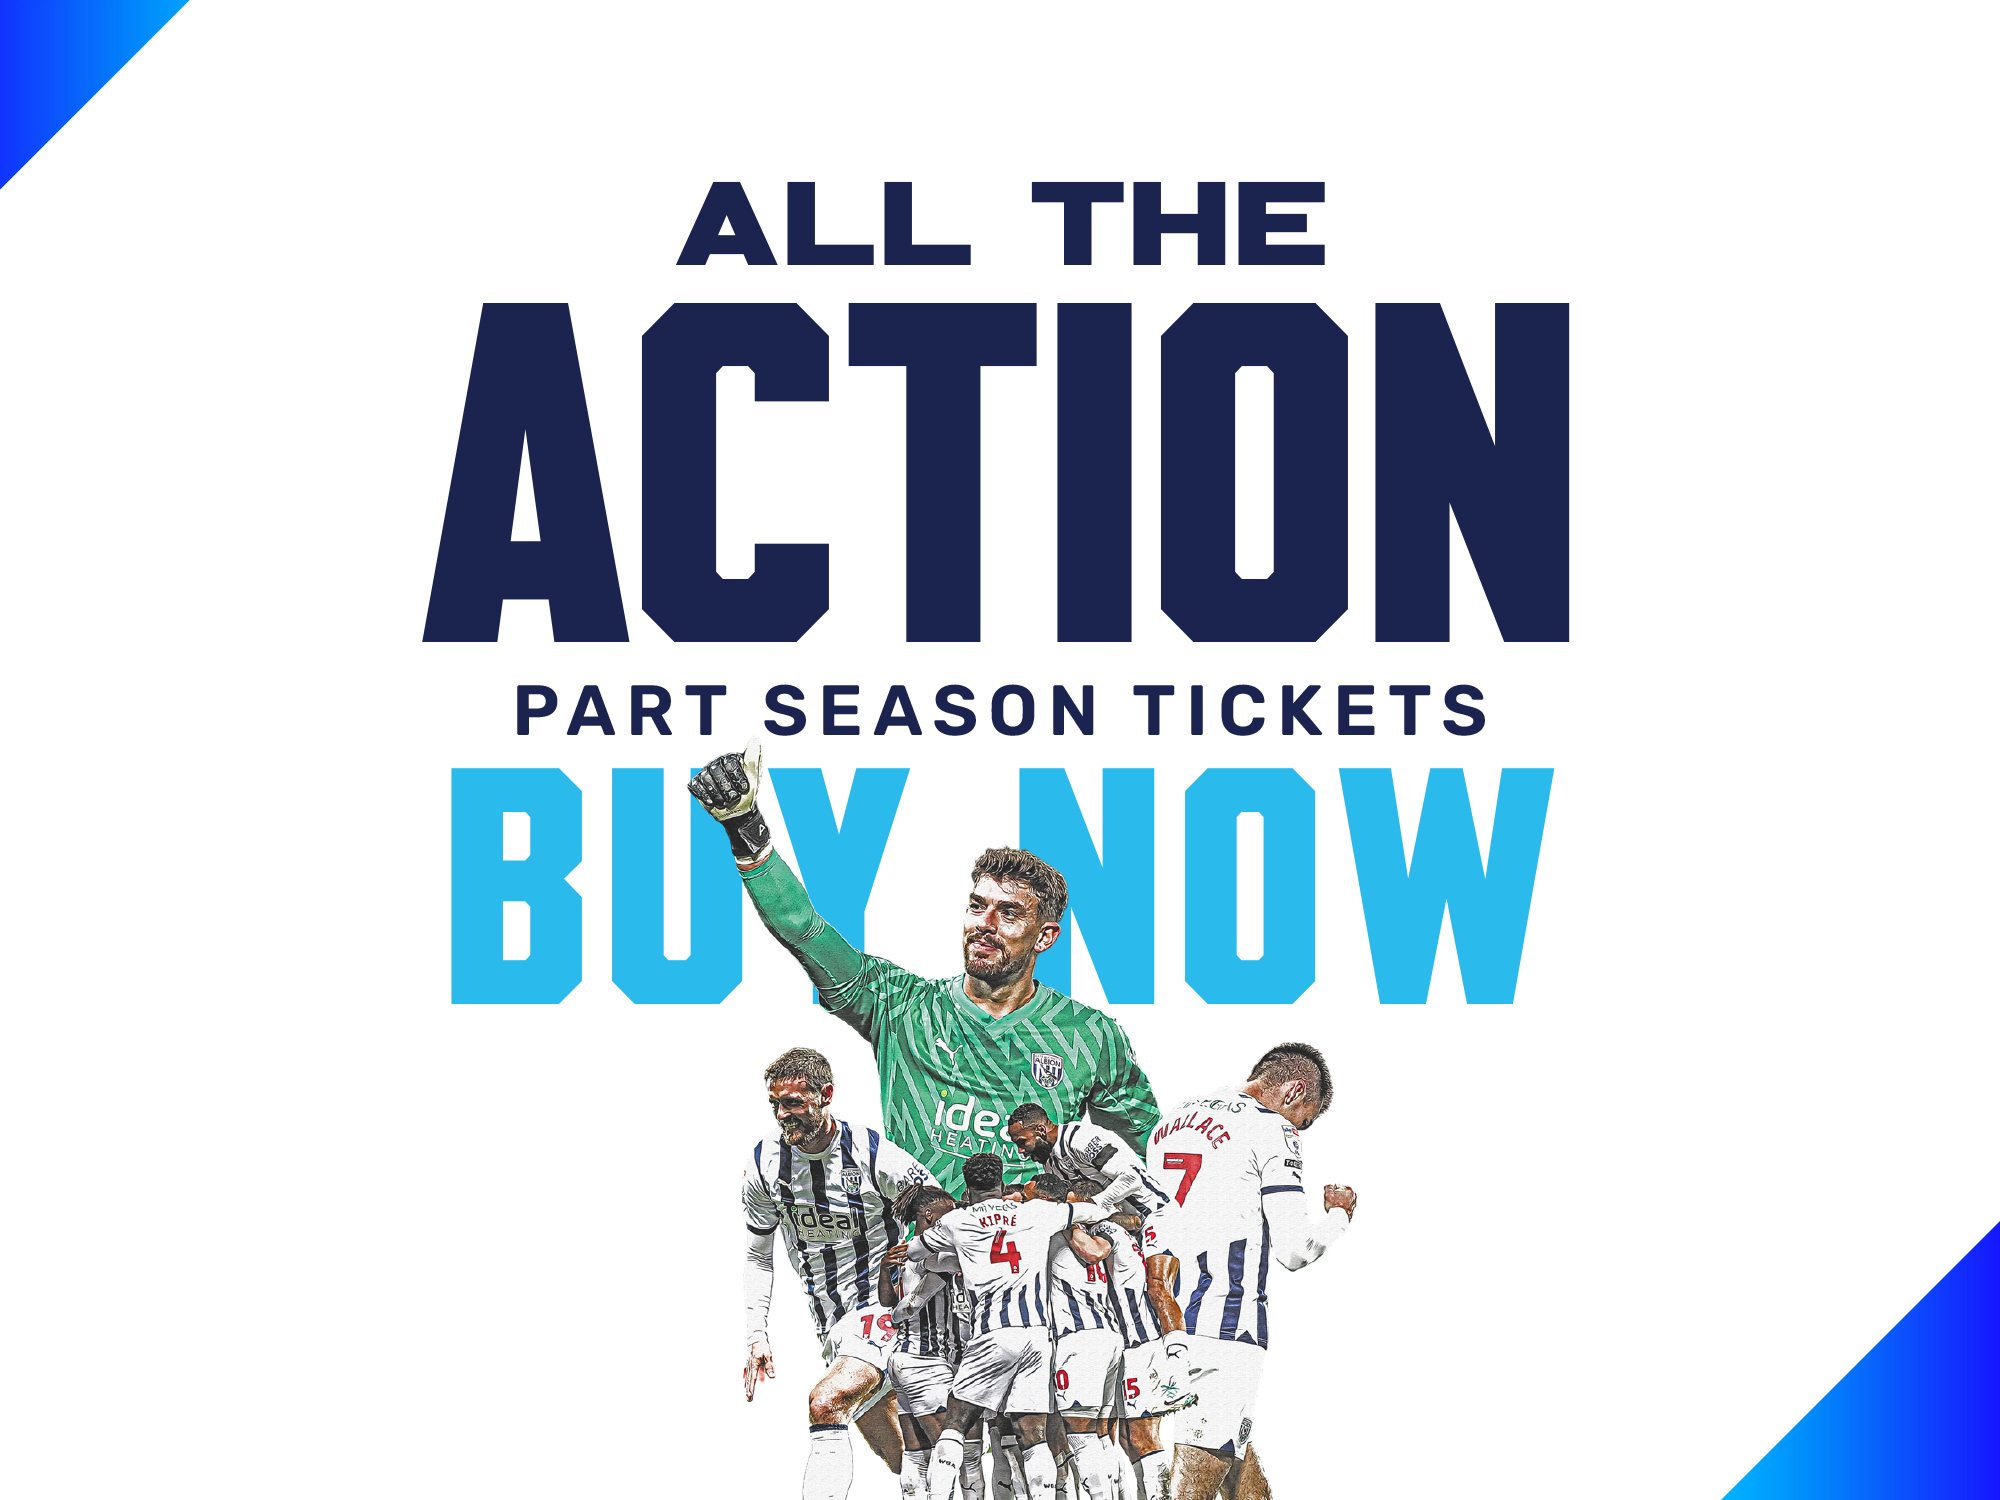 A graphic announcing Part Season Tickets.